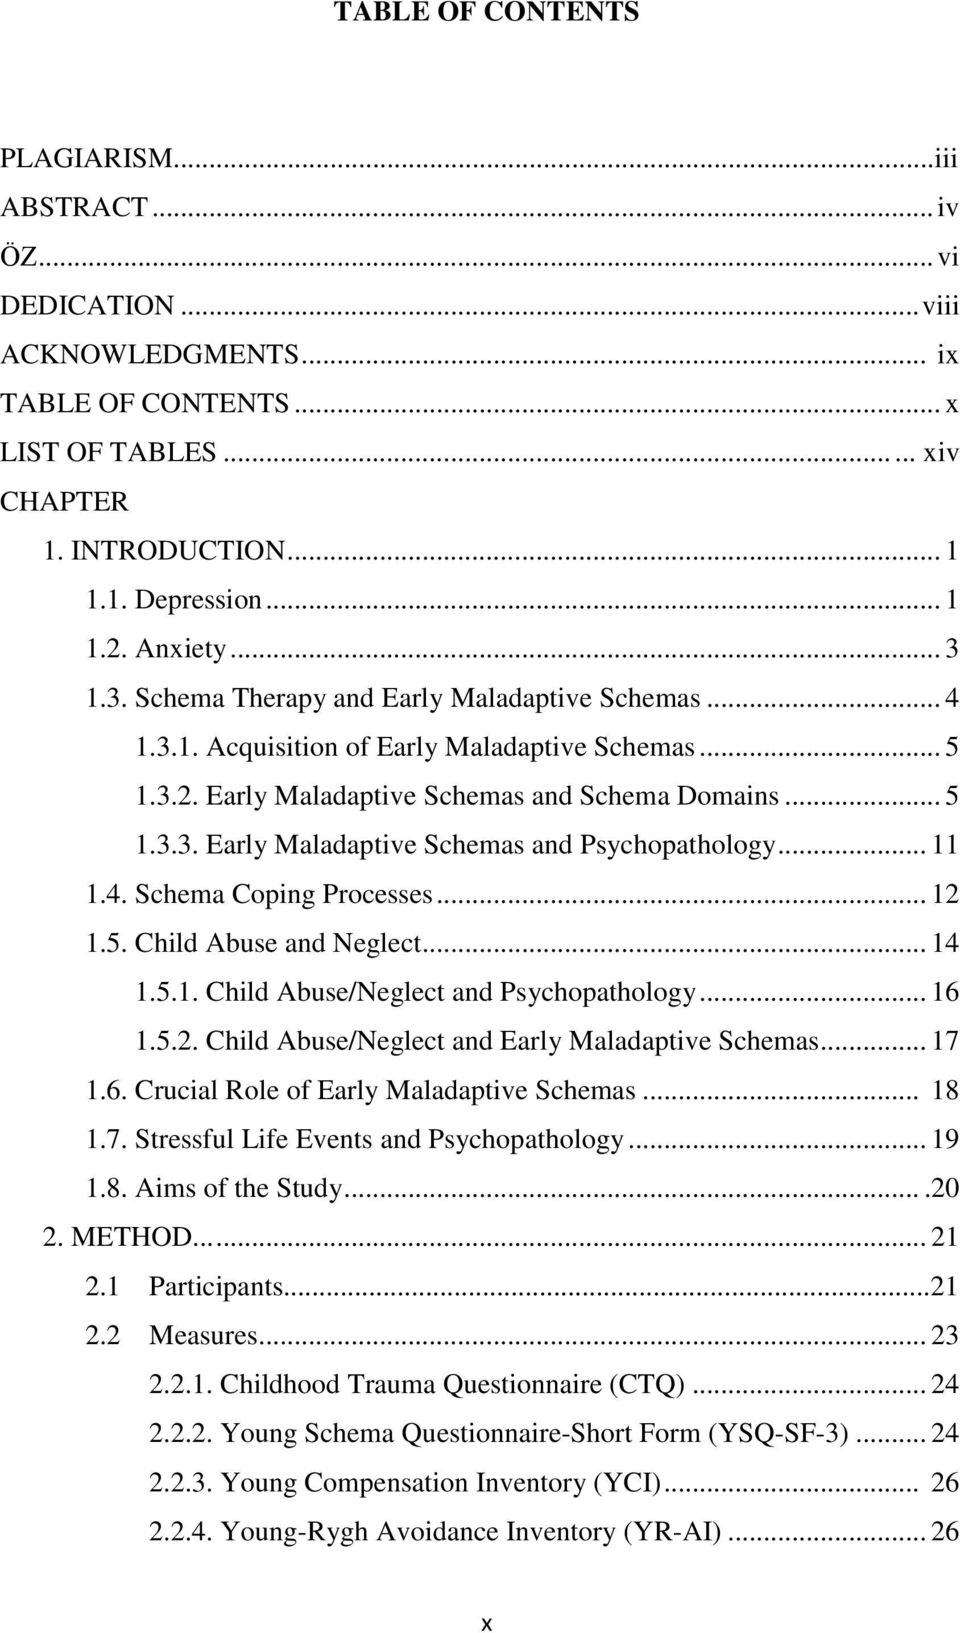 .. 11 1.4. Schema Coping Processes... 12 1.5. Child Abuse and Neglect... 14 1.5.1. Child Abuse/Neglect and Psychopathology... 16 1.5.2. Child Abuse/Neglect and Early Maladaptive Schemas... 17 1.6. Crucial Role of Early Maladaptive Schemas.